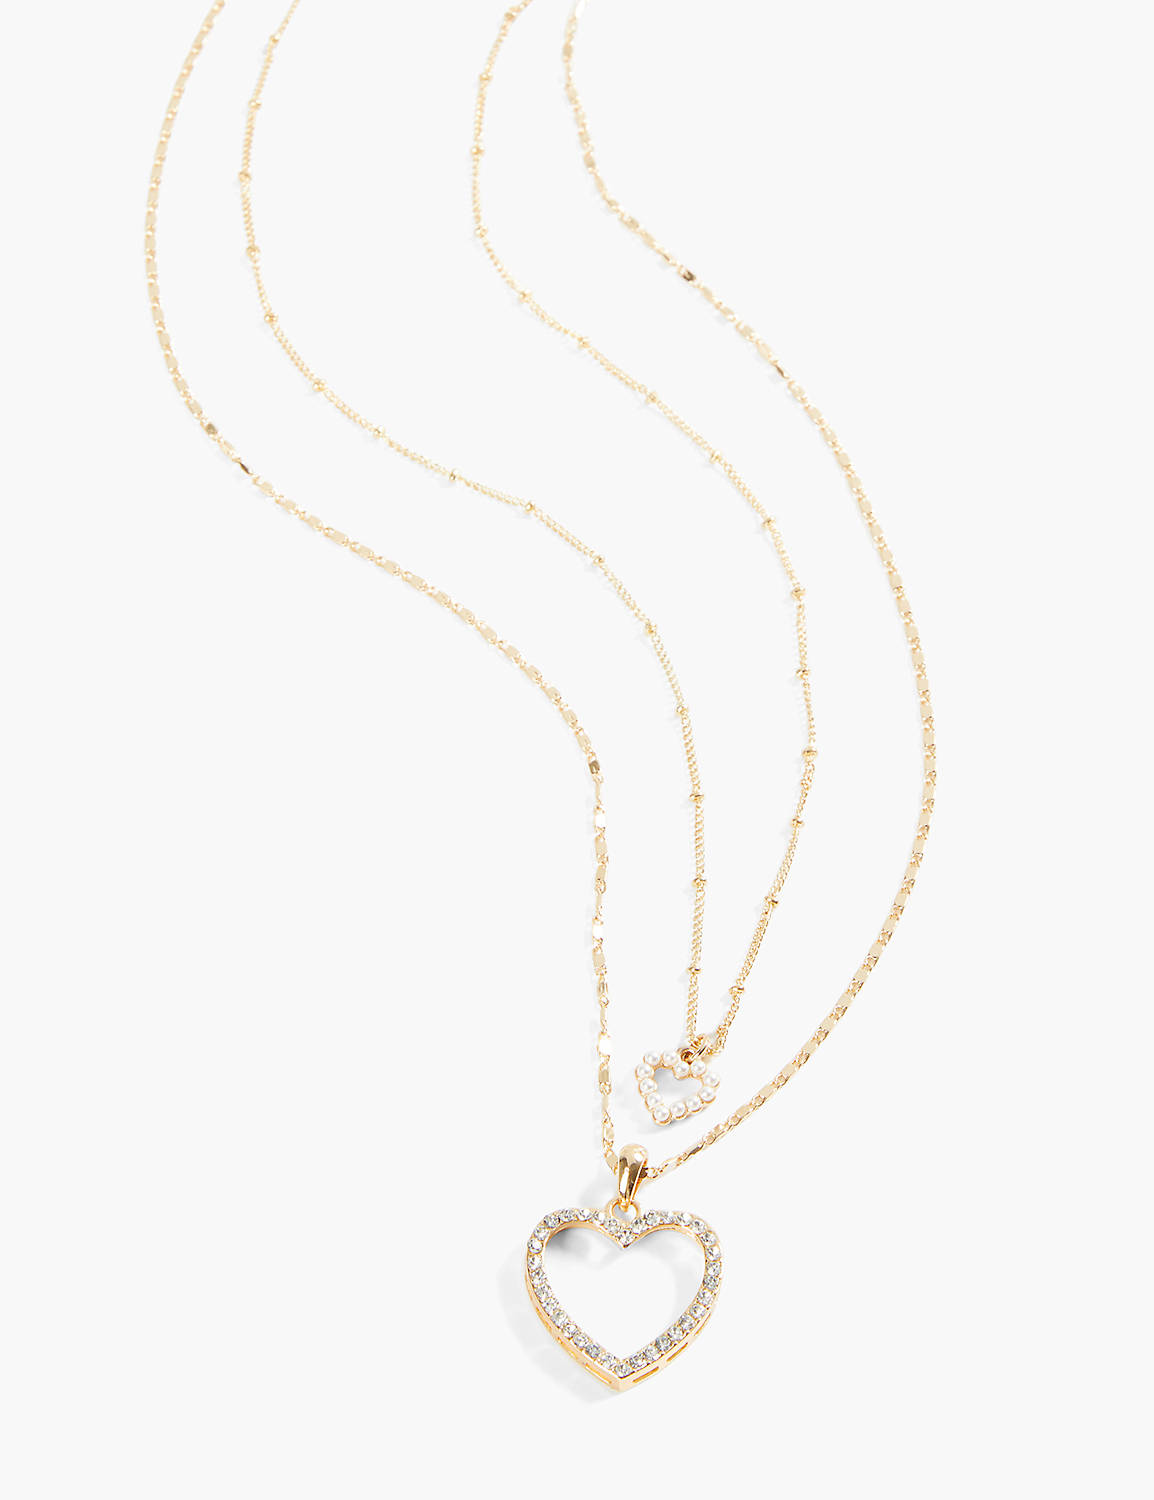 GRADUATED PEARL HEARTS NECKLACE Product Image 1